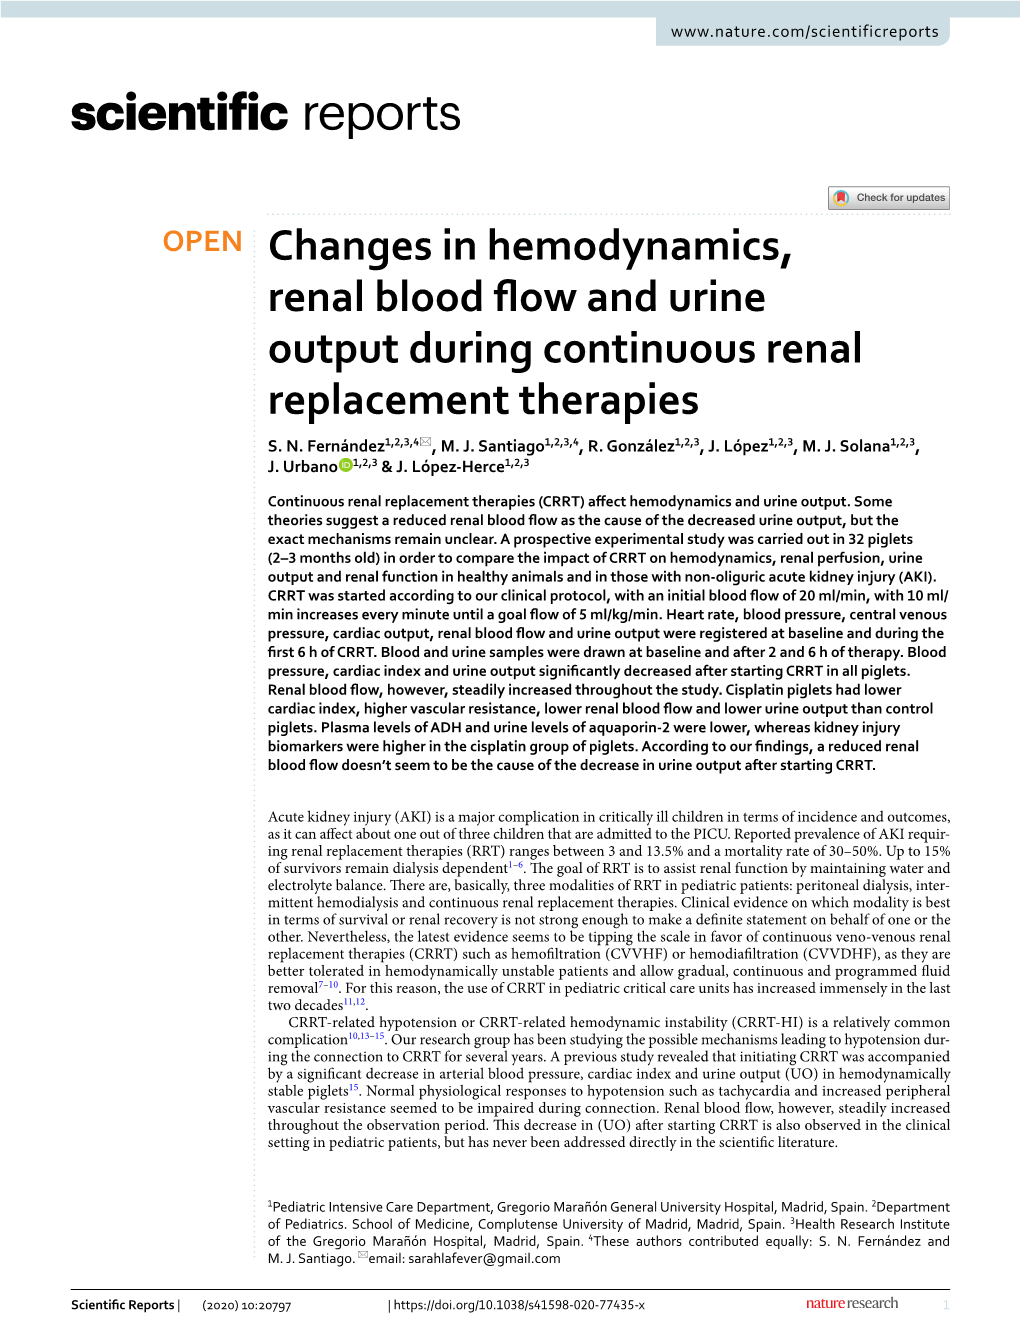 Changes in Hemodynamics, Renal Blood Flow and Urine Output During